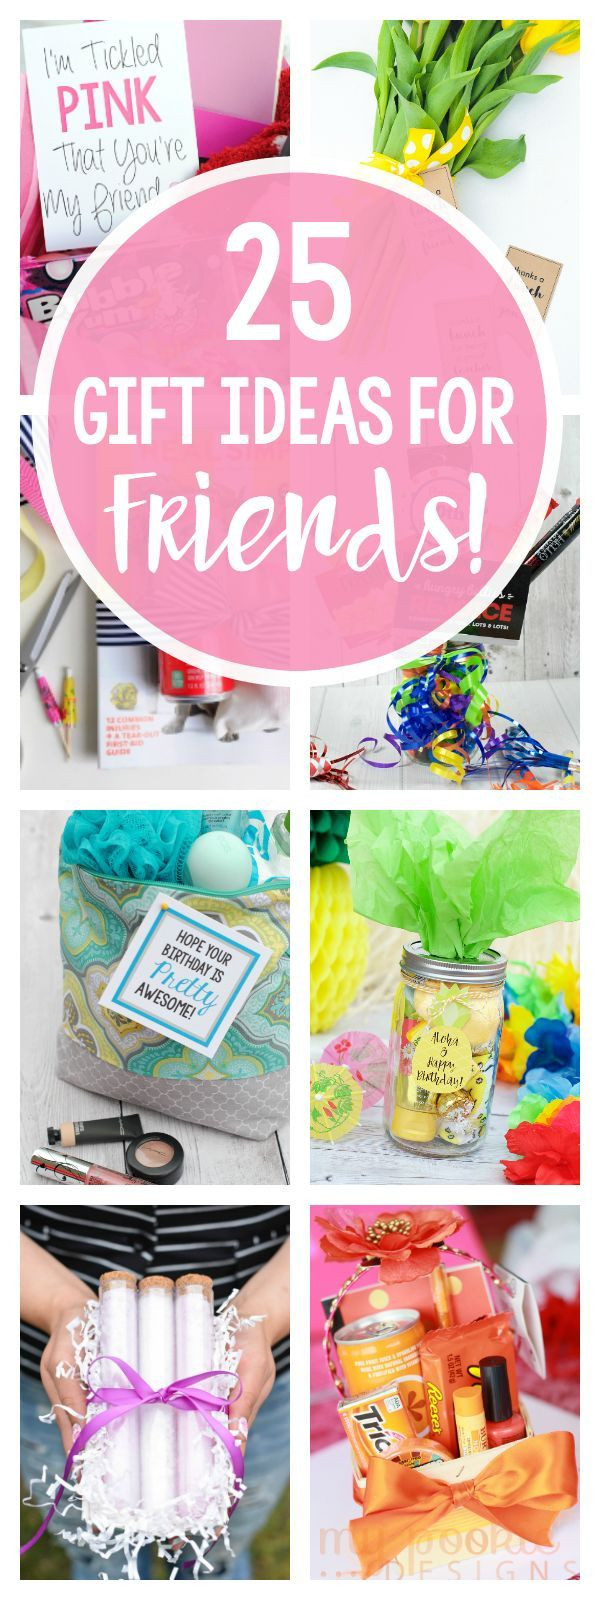 Cheap Graduation Gift Ideas For Friends
 212 best images about Cheap but Thoughtful Gift ideas on